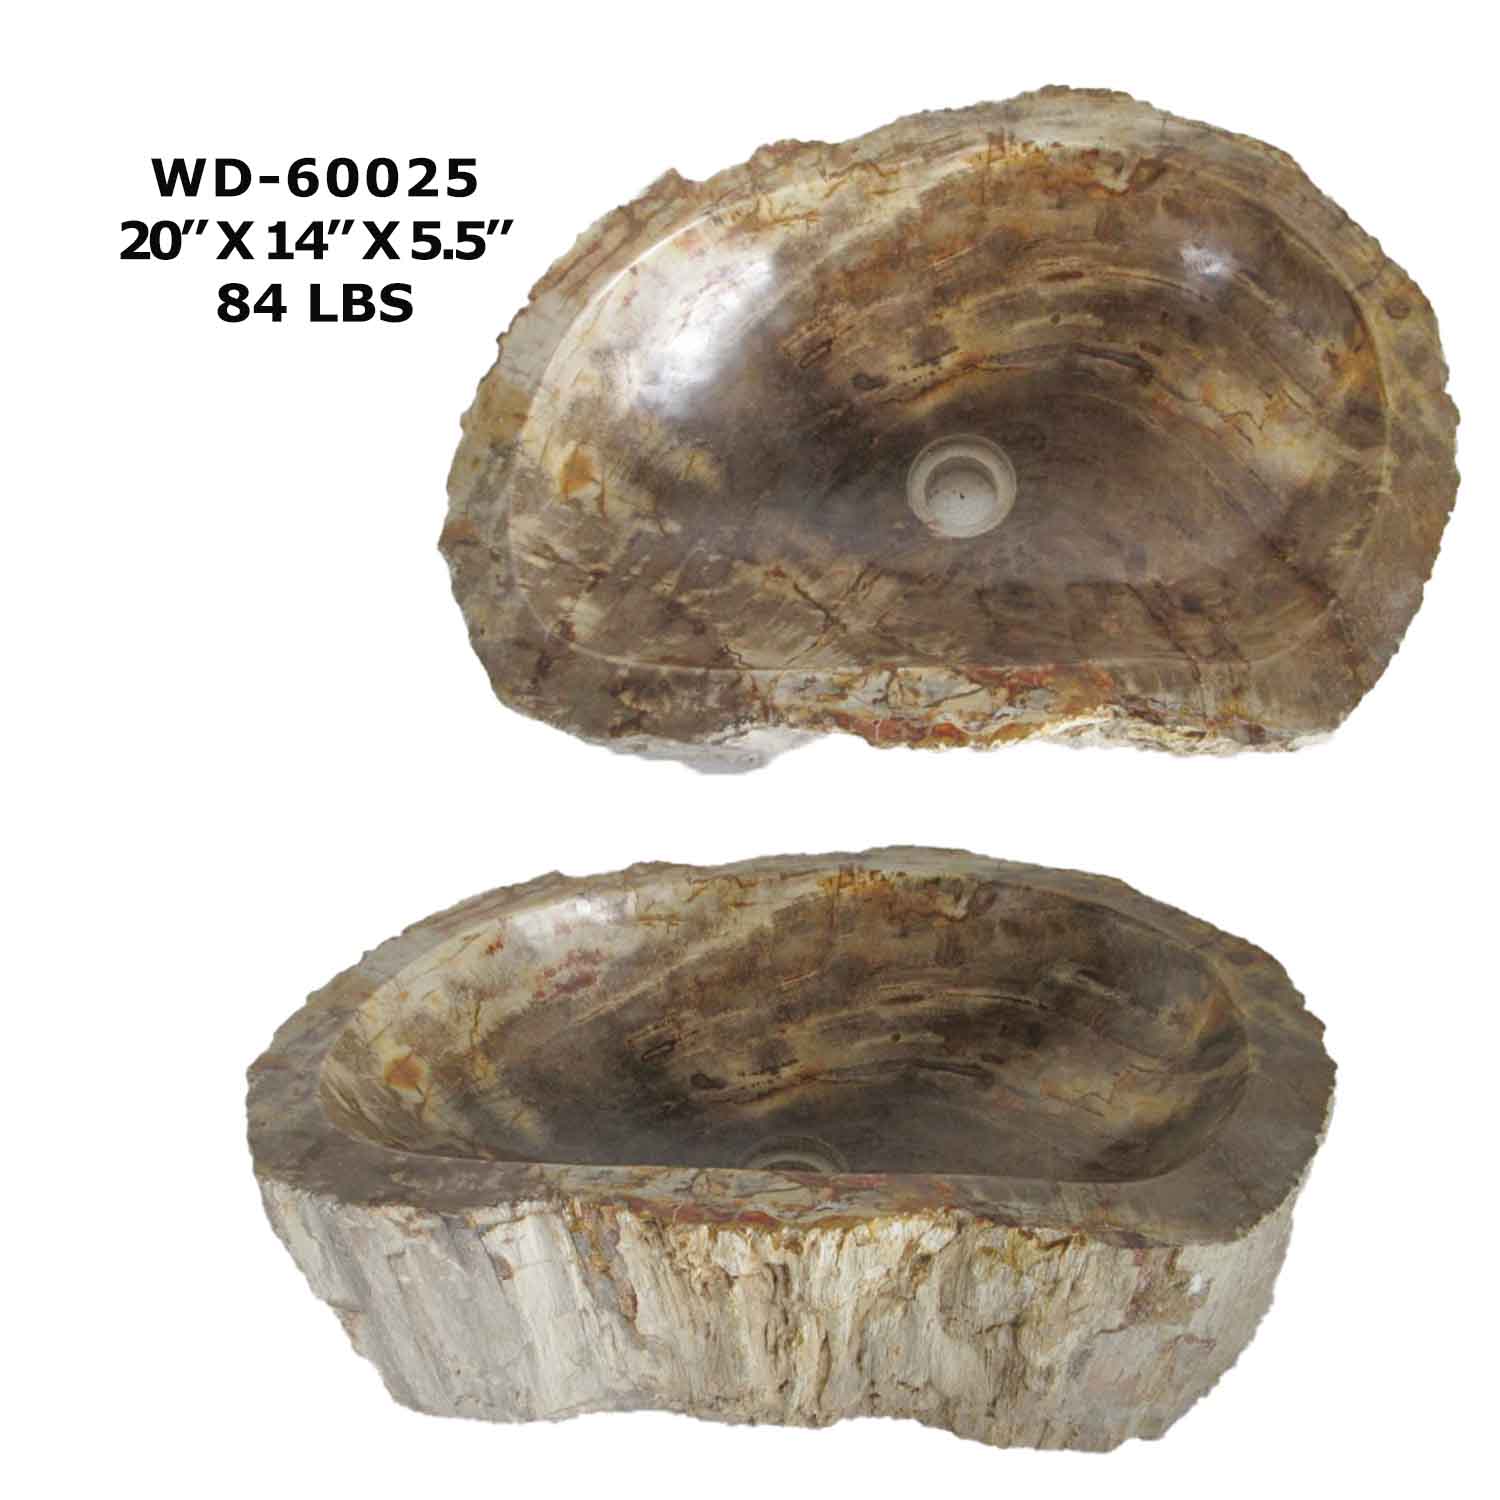 Natural Petrified Wood Sink, Fossil Stone Vessel Sink - WD 60025